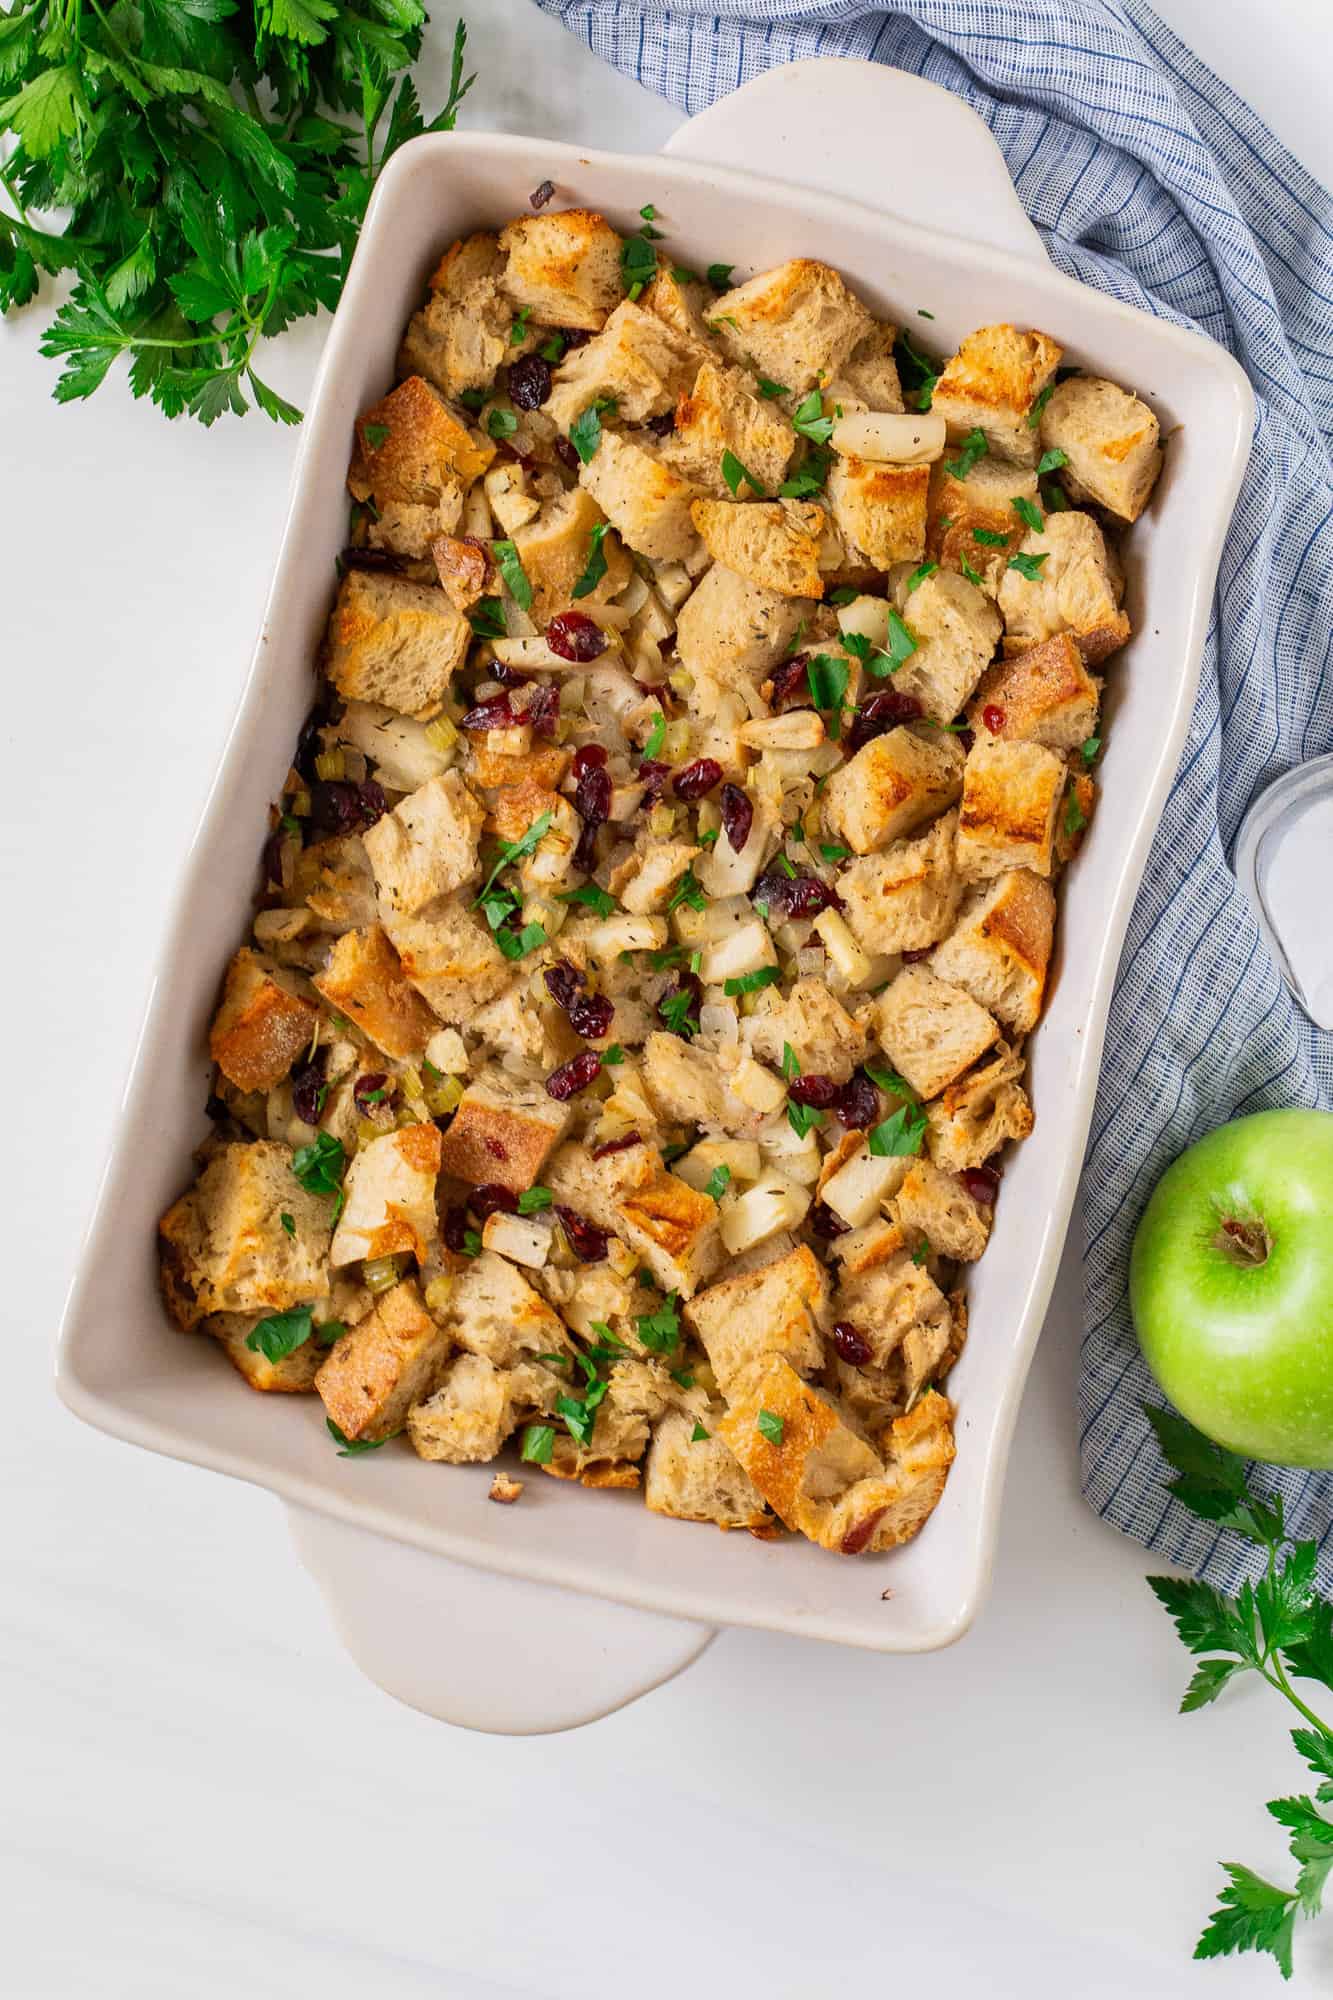 Apple stuffing in an off white casserole dish, with an apple nearby.